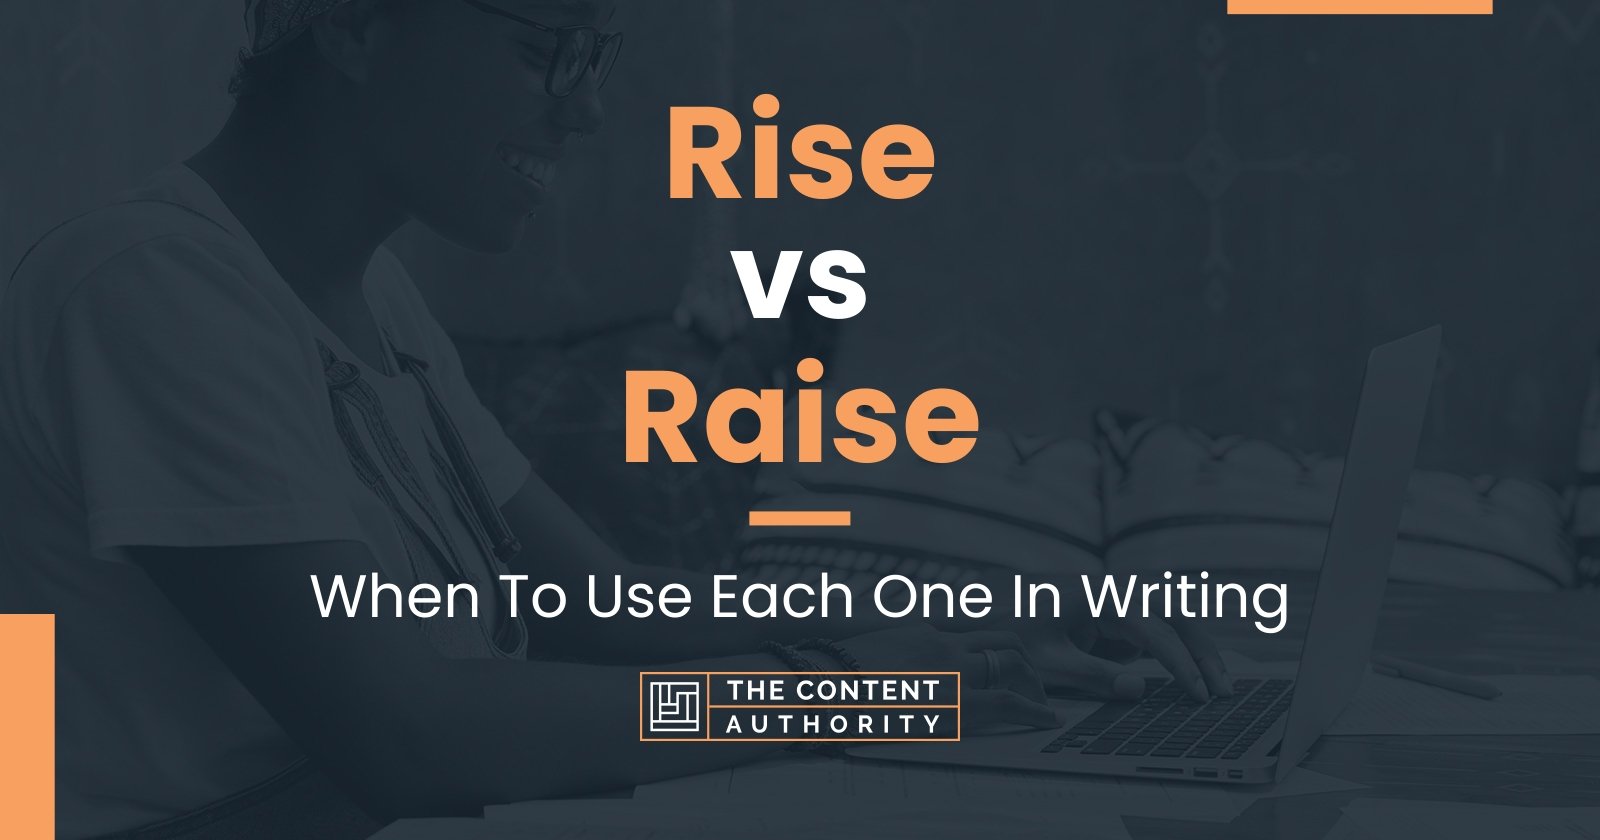 Rise vs Raise: When To Use Each One In Writing